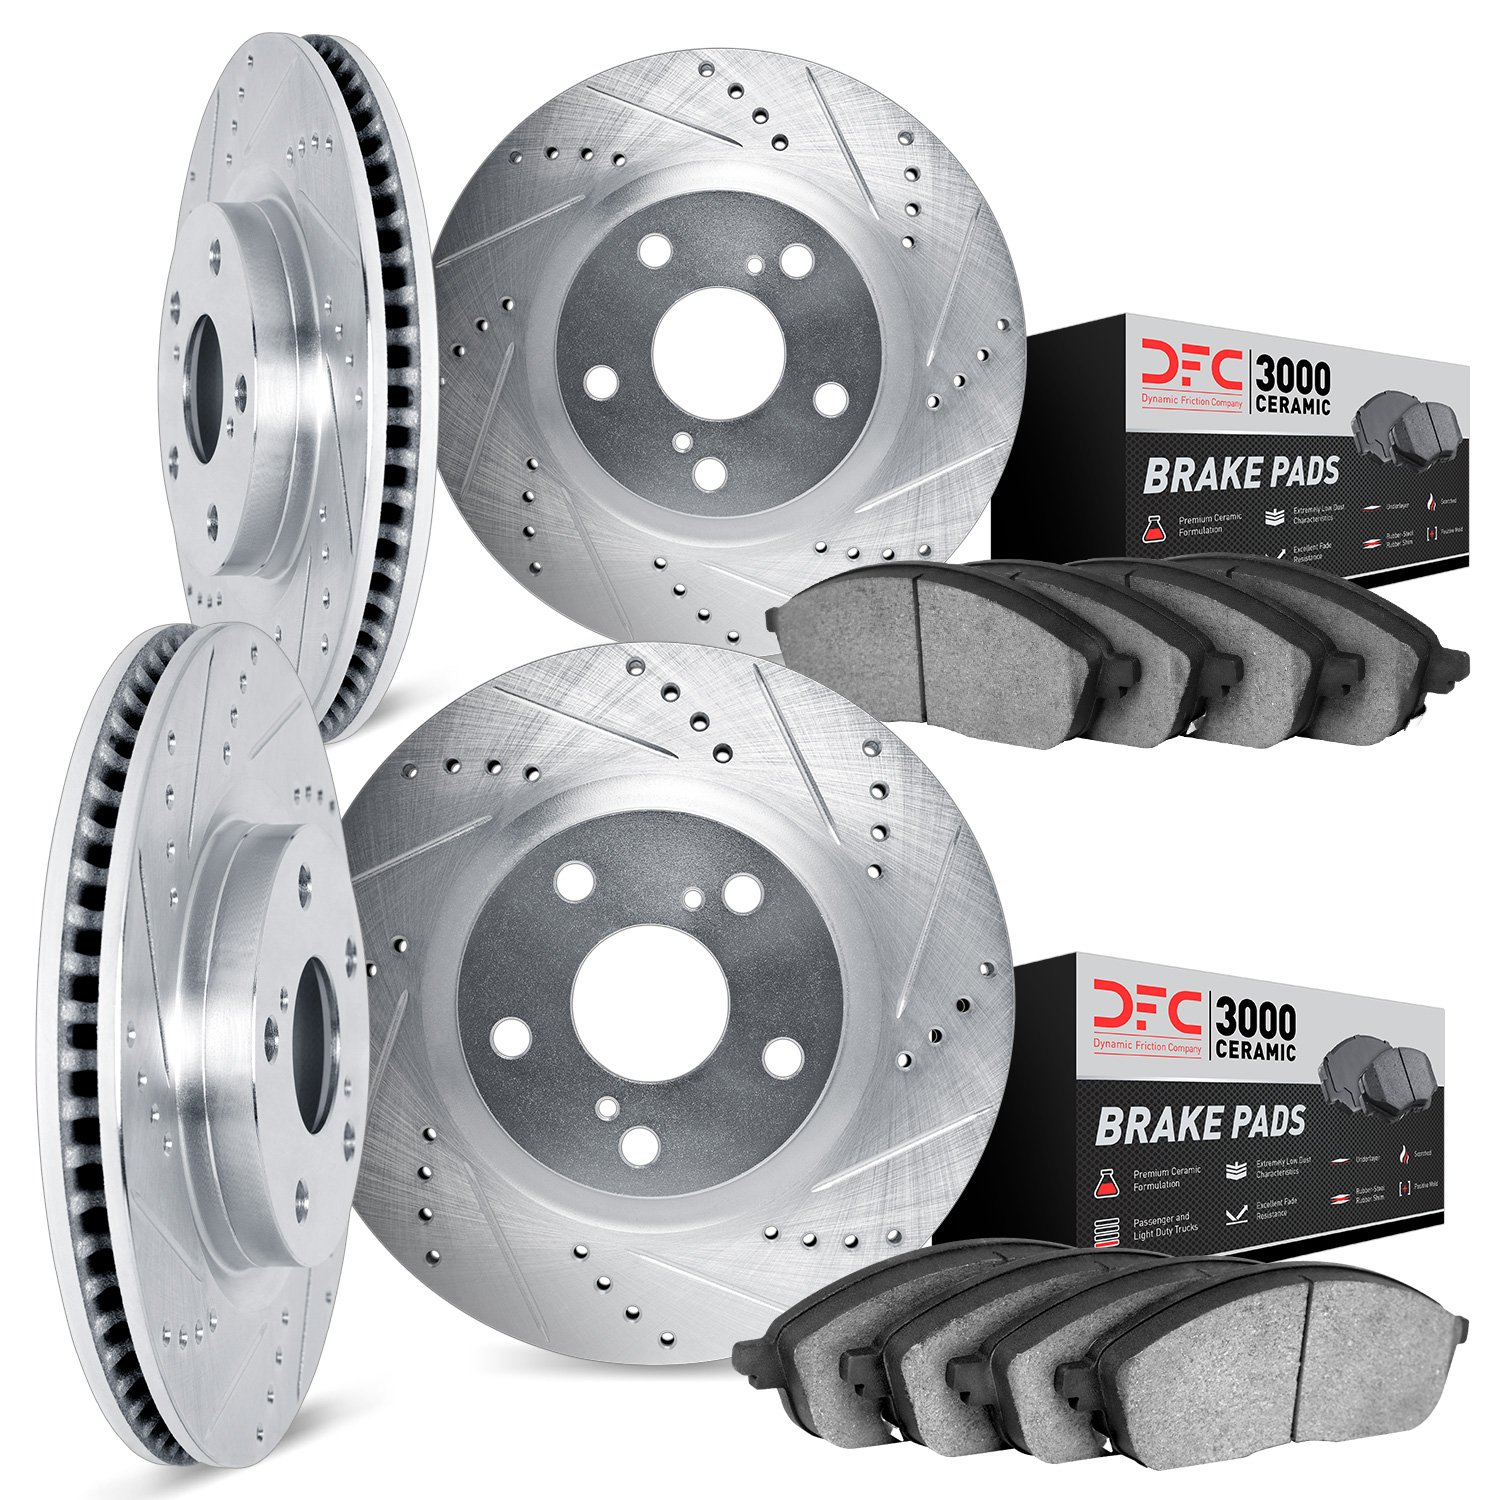 7304-56030 Drilled/Slotted Brake Rotor with 3000-Series Ceramic Brake Pads Kit [Silver], 2003-2011 Ford/Lincoln/Mercury/Mazda, P